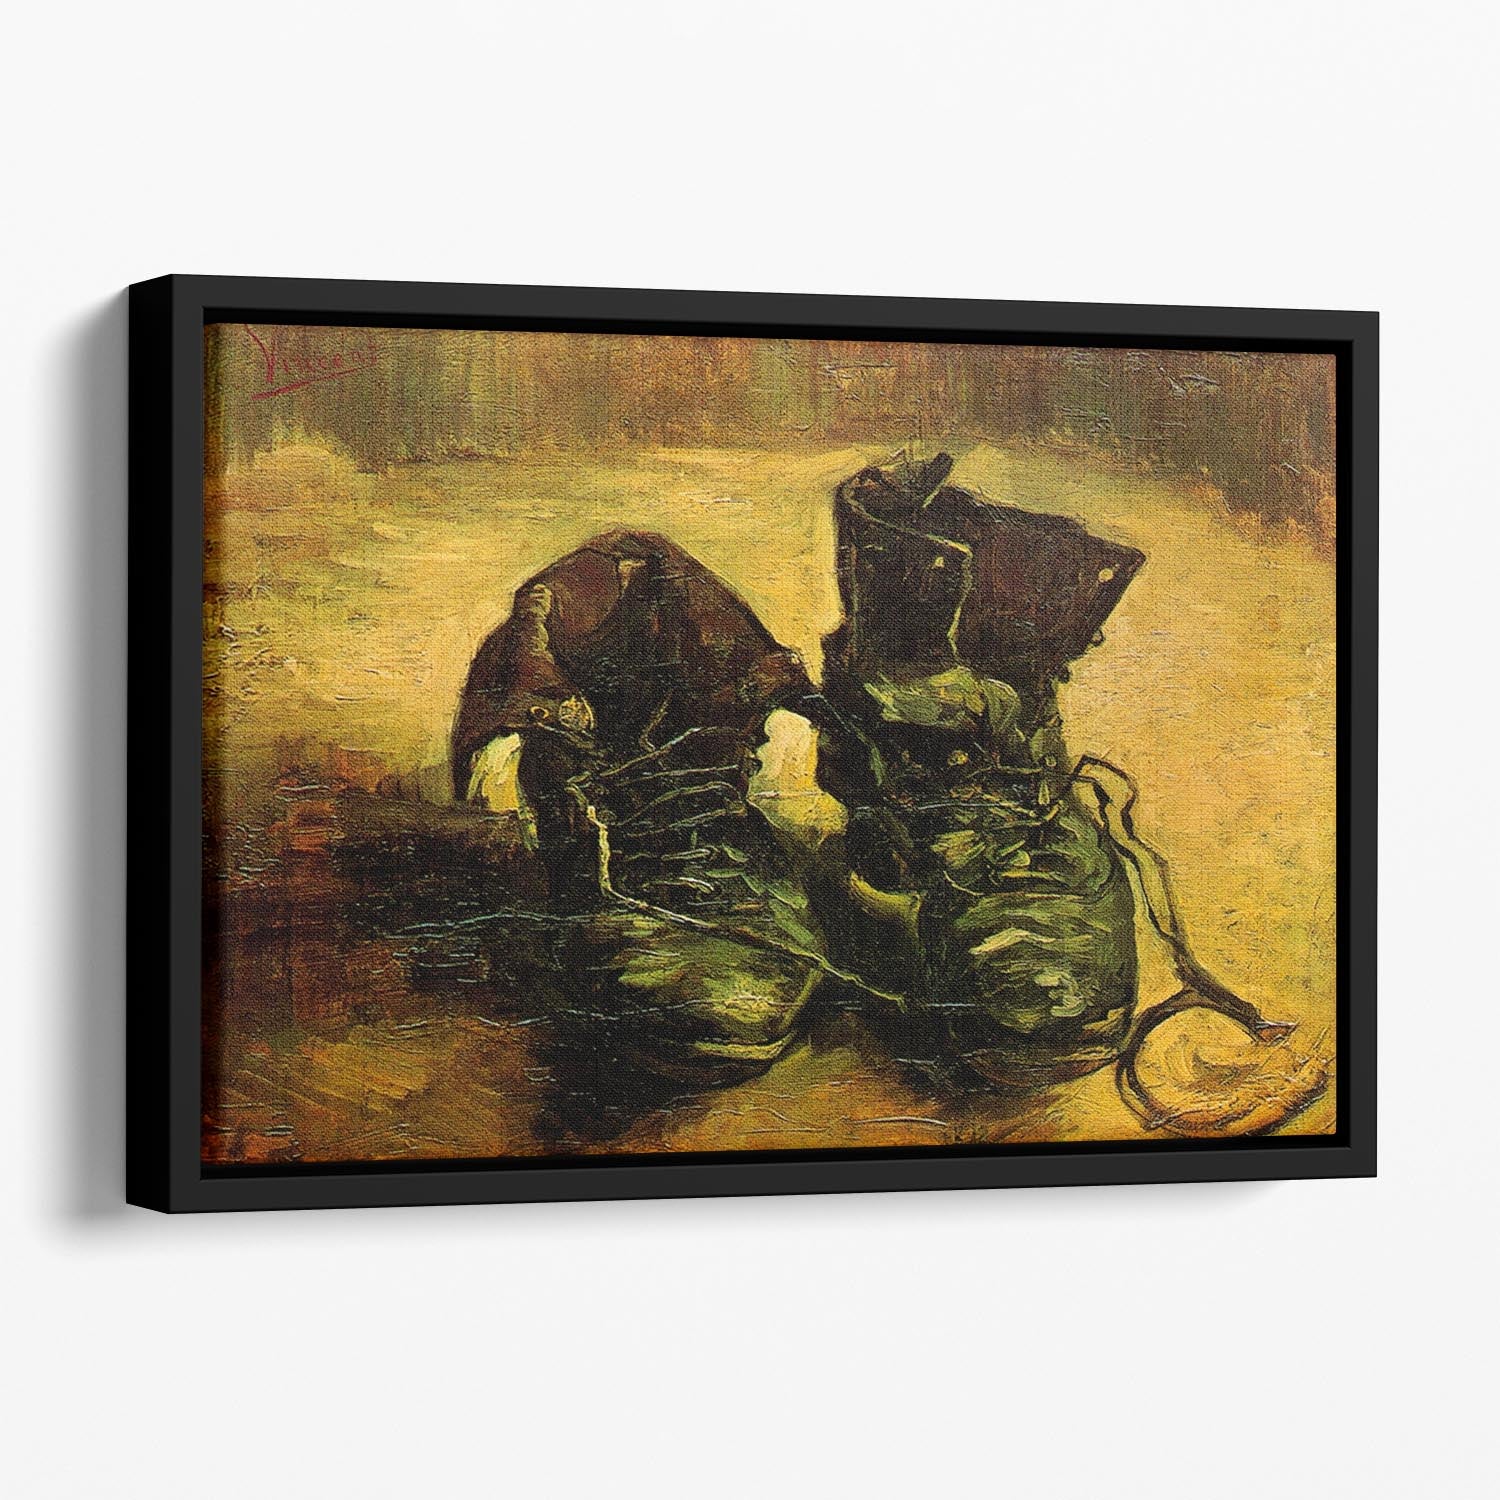 A Pair of Shoes 2 by Van Gogh Floating Framed Canvas